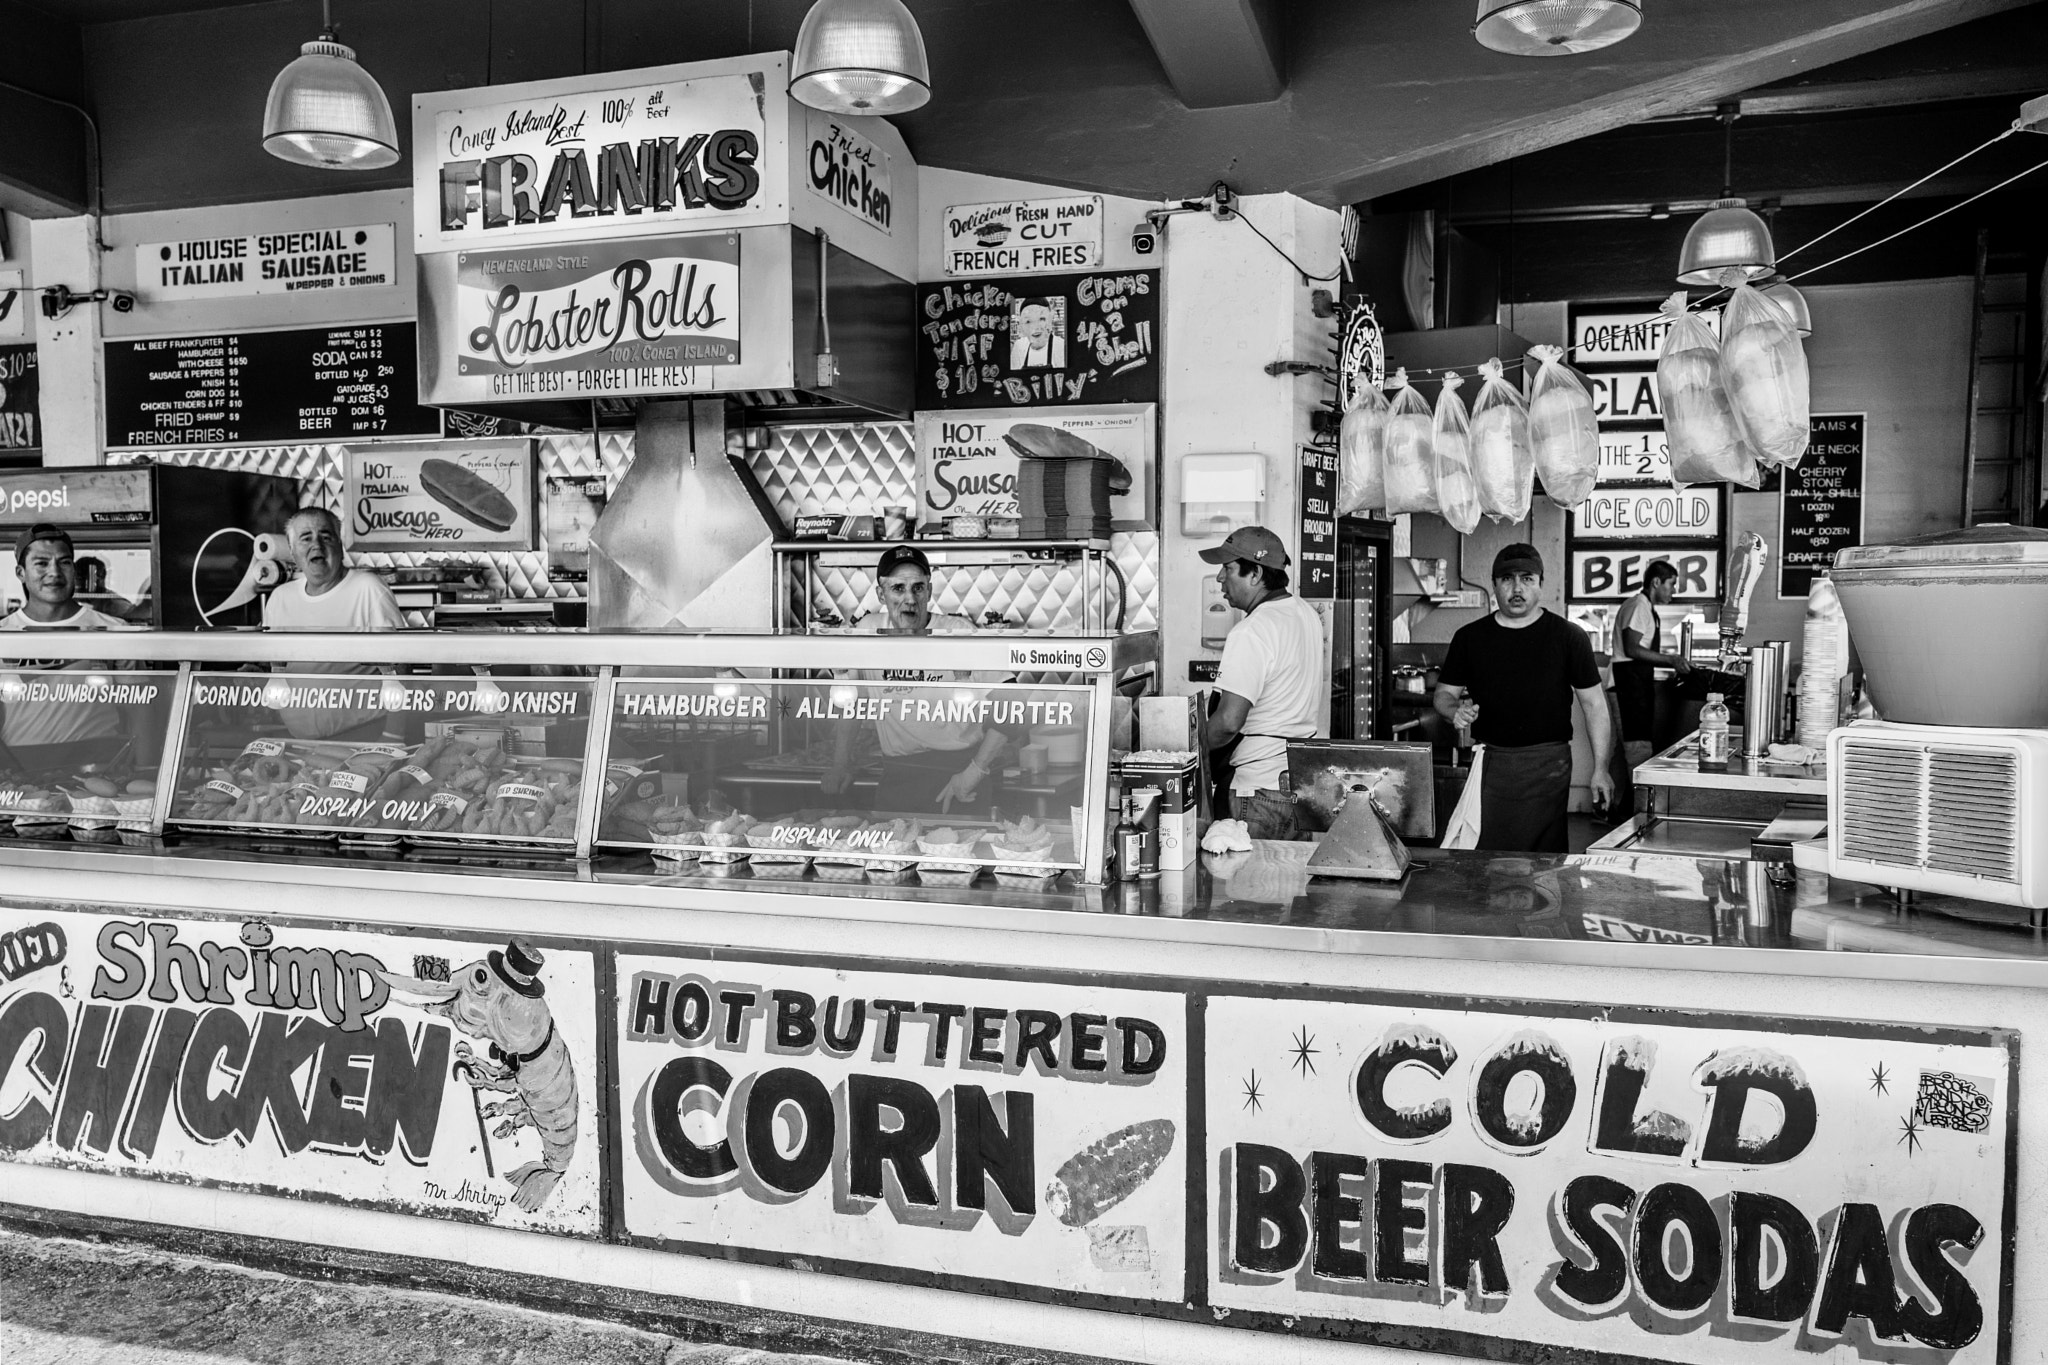 A New York minute - Coney island lunch...